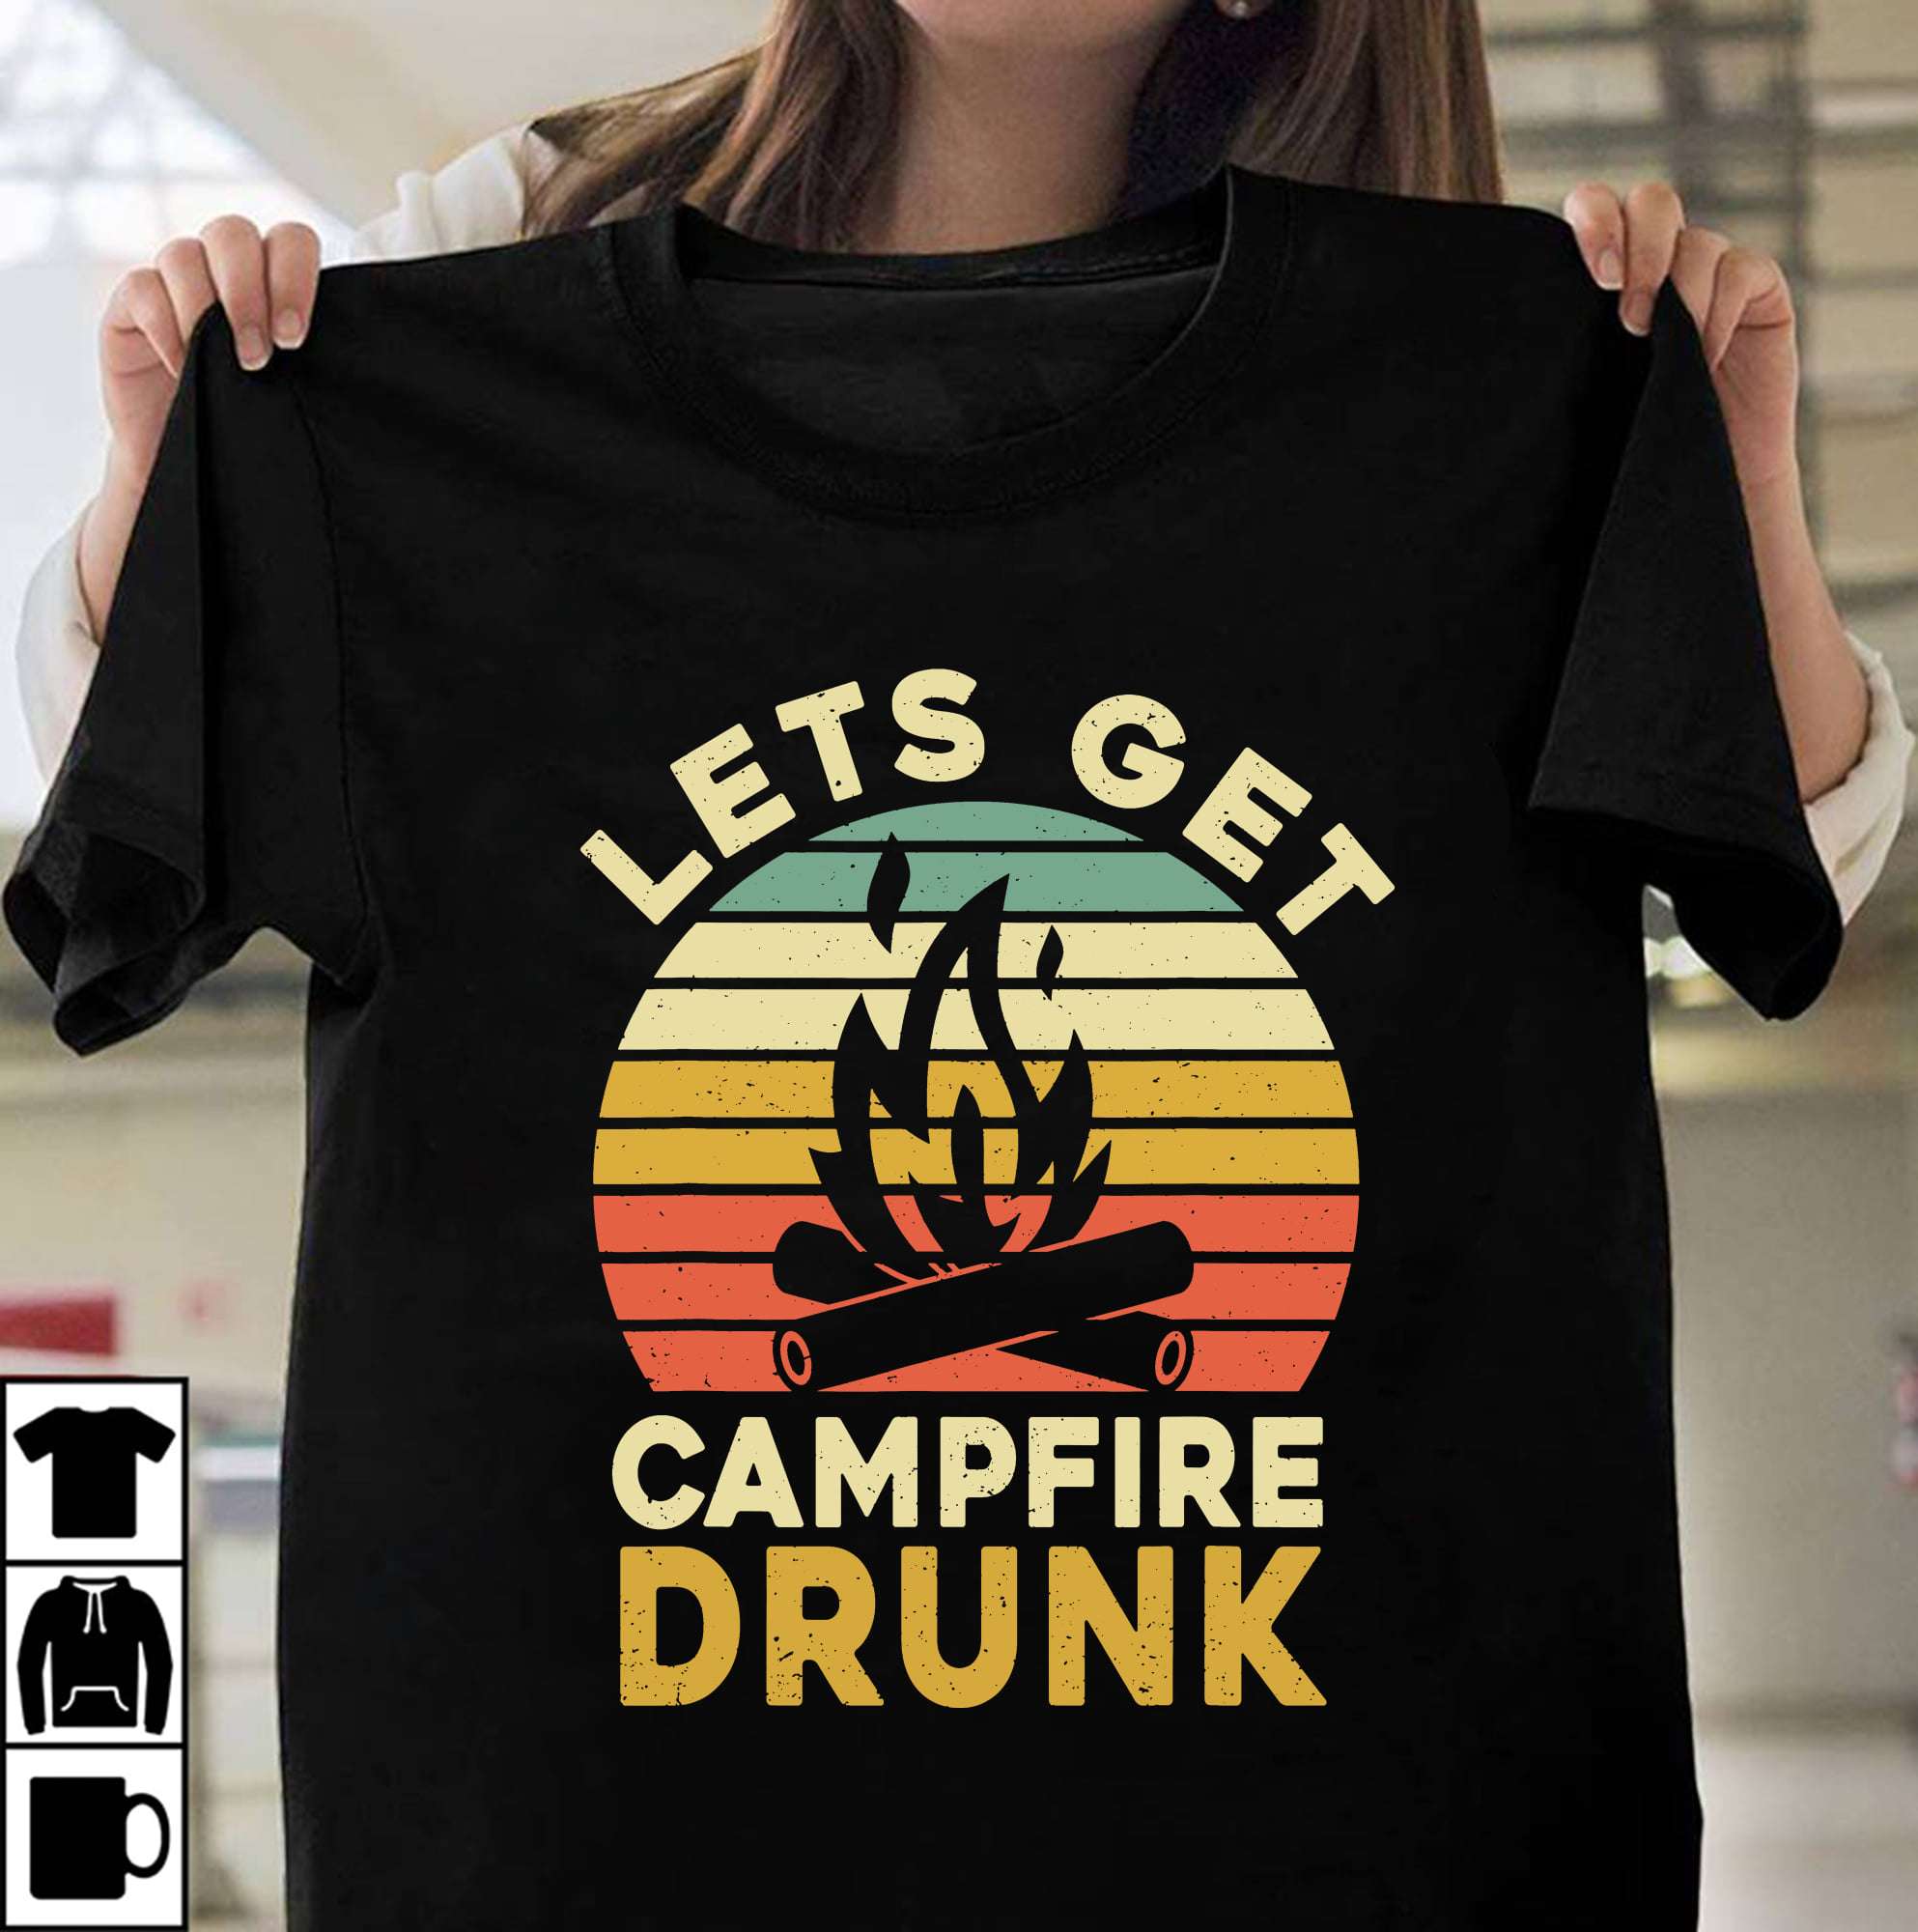 Lets get campfire drunk - Drinking while camping, drinking next to campfire